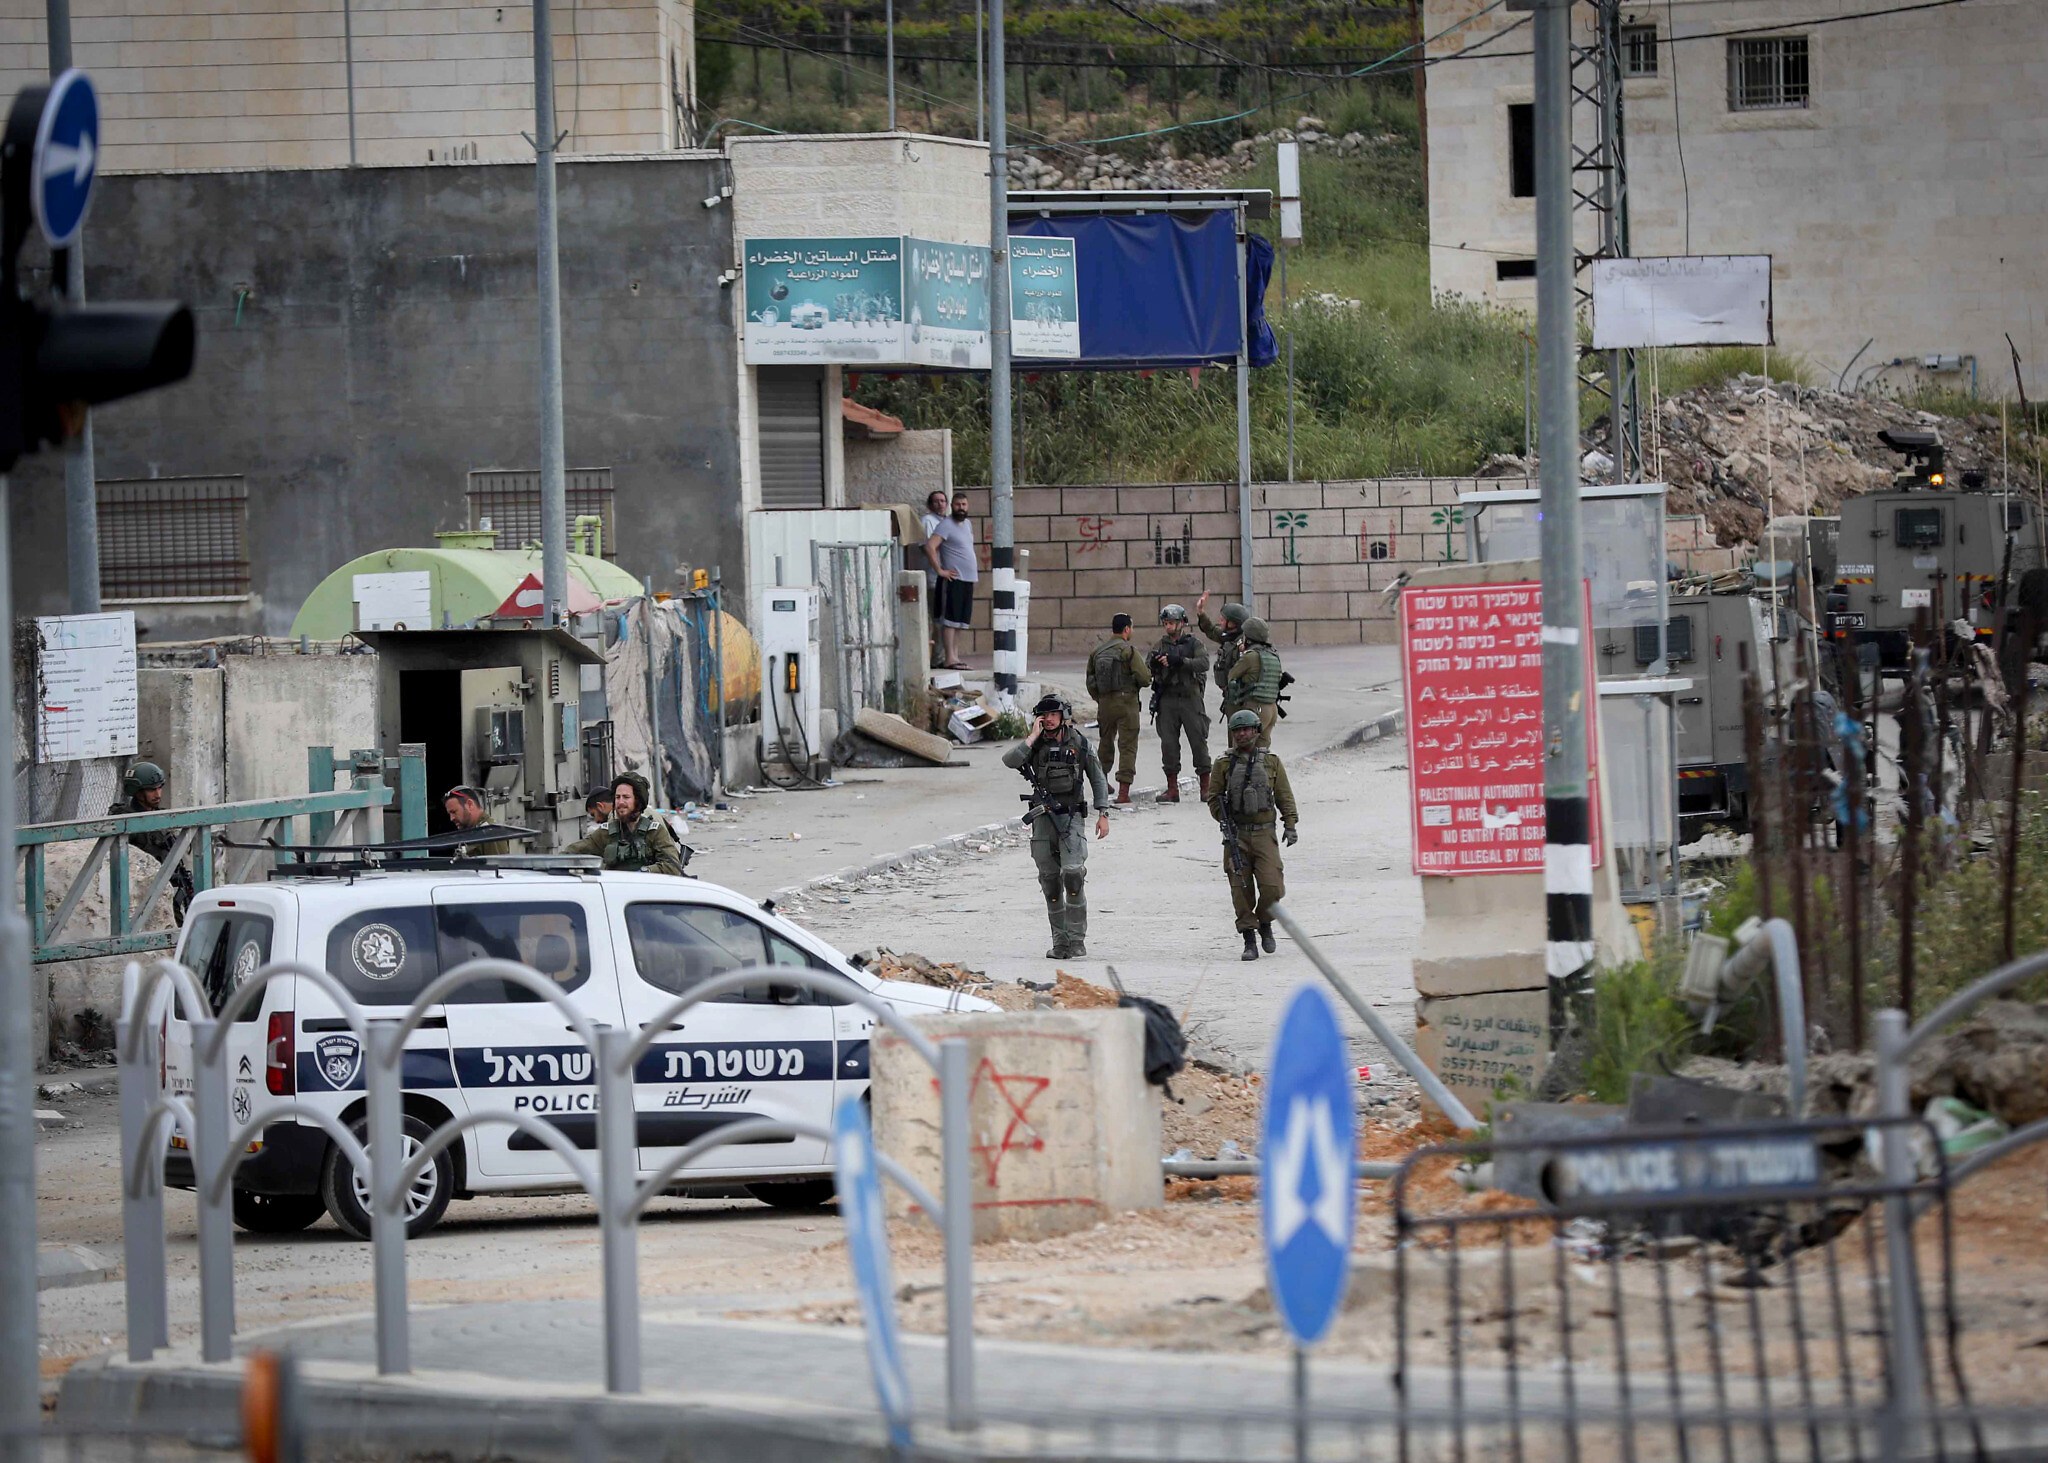 3 Palestinians shot dead while attacking IDF troops in West Bank